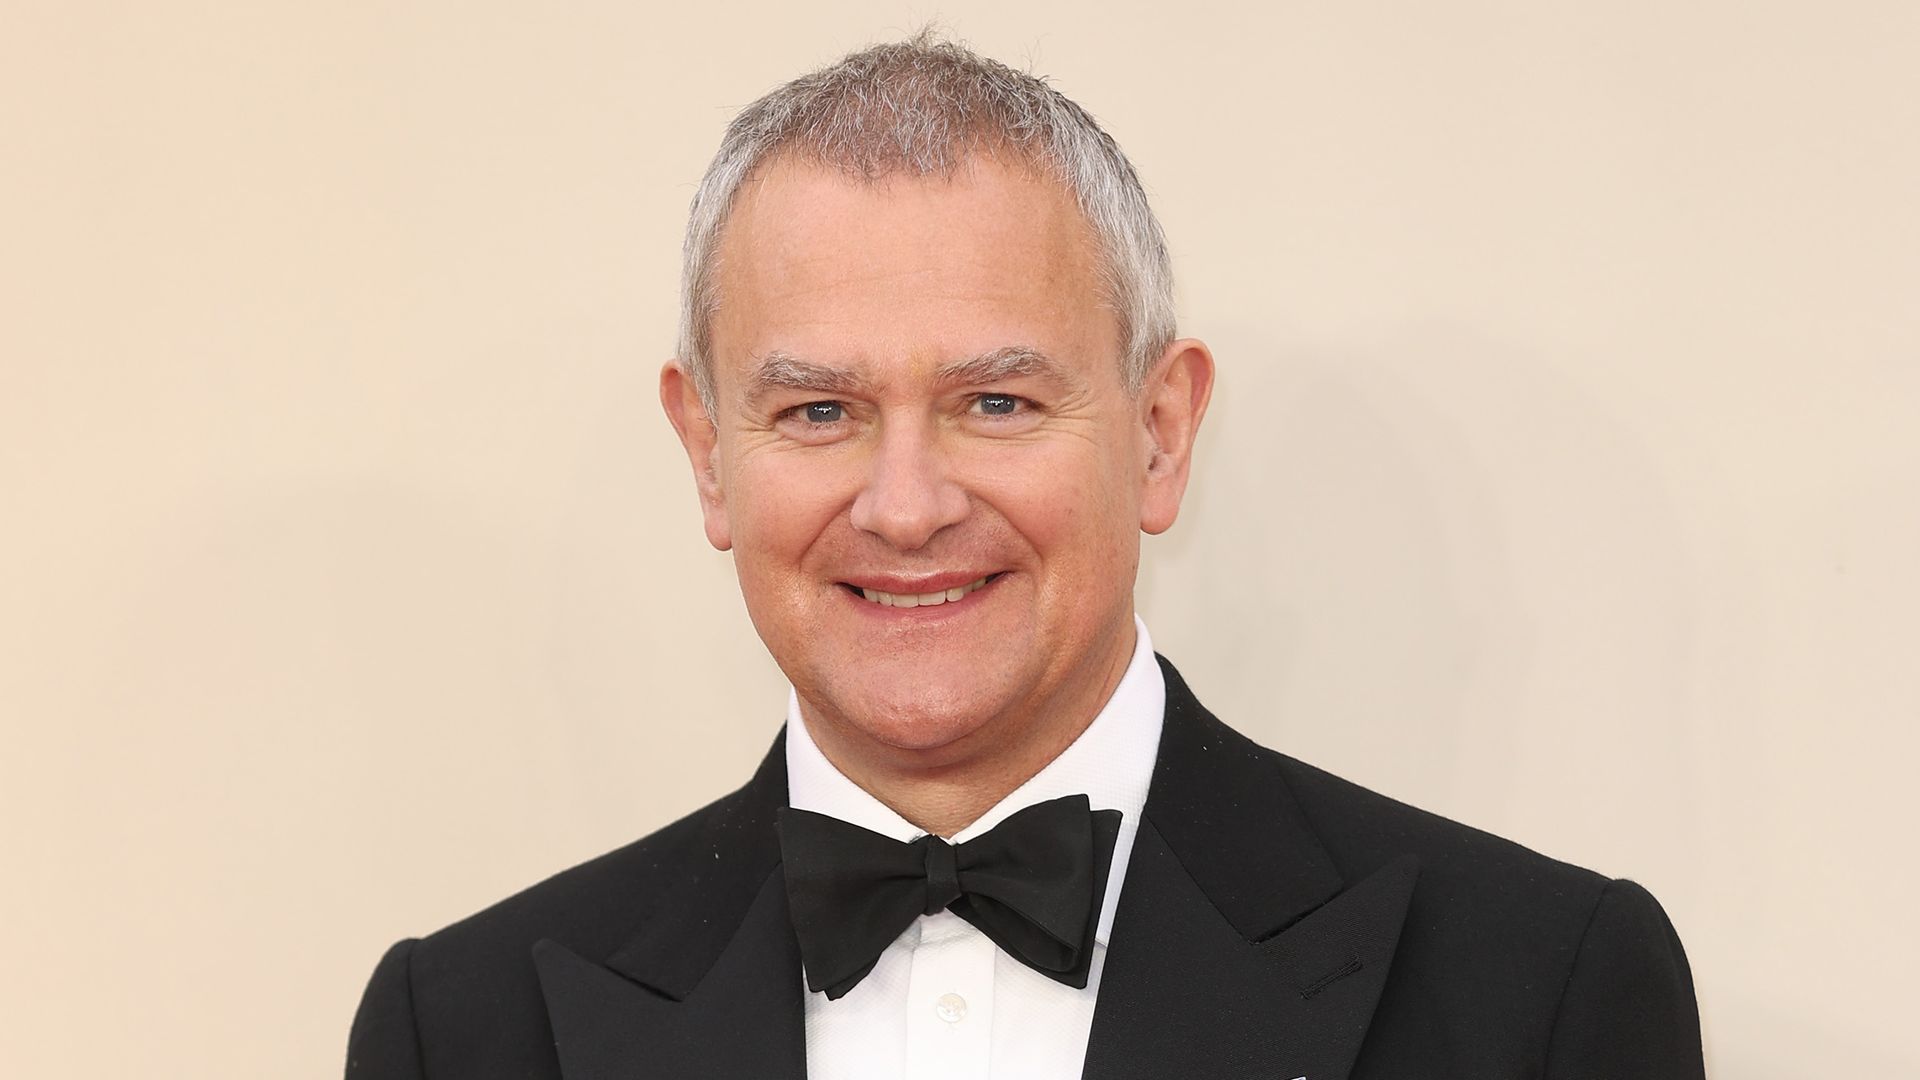 Hugh Bonneville attends the World Premiere of "Downton Abbey: A New Era" at Cineworld Leicester Square on April 25, 2022 in London, England